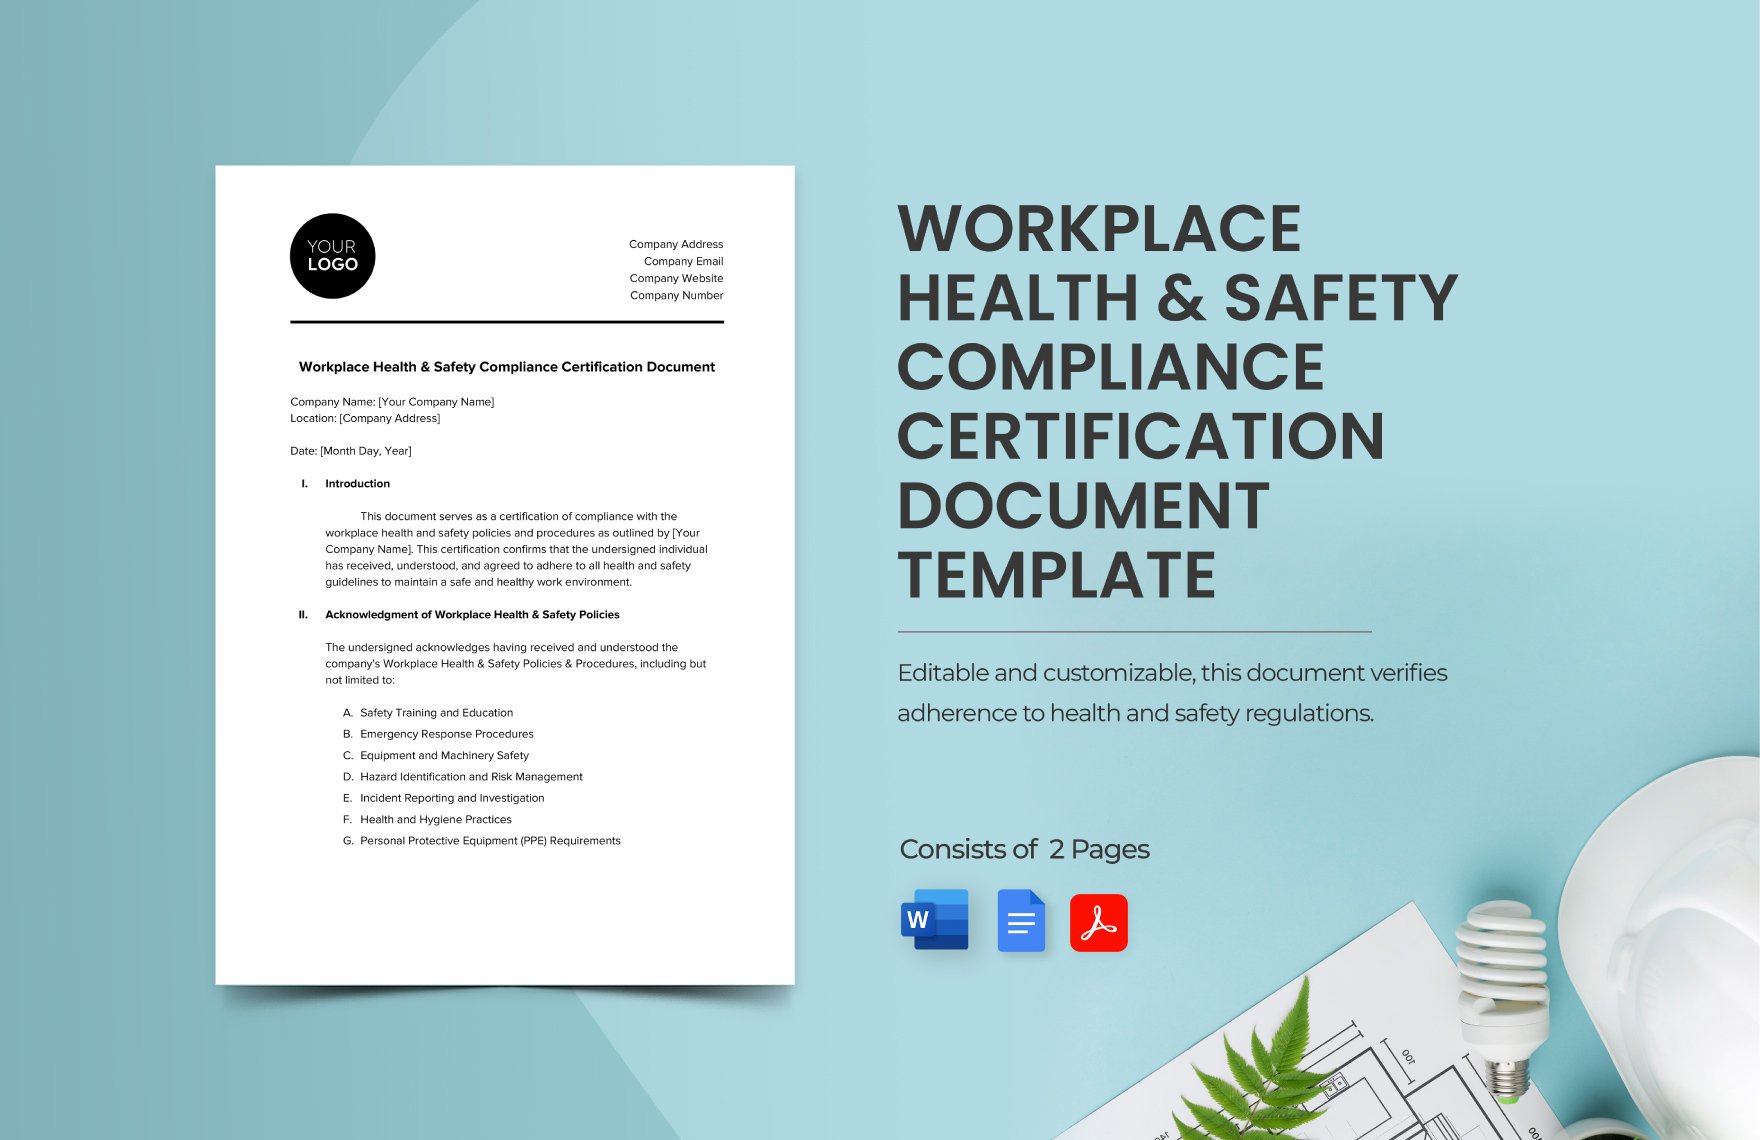 Workplace Health & Safety Compliance Certification Document Template in Word, Google Docs, PDF